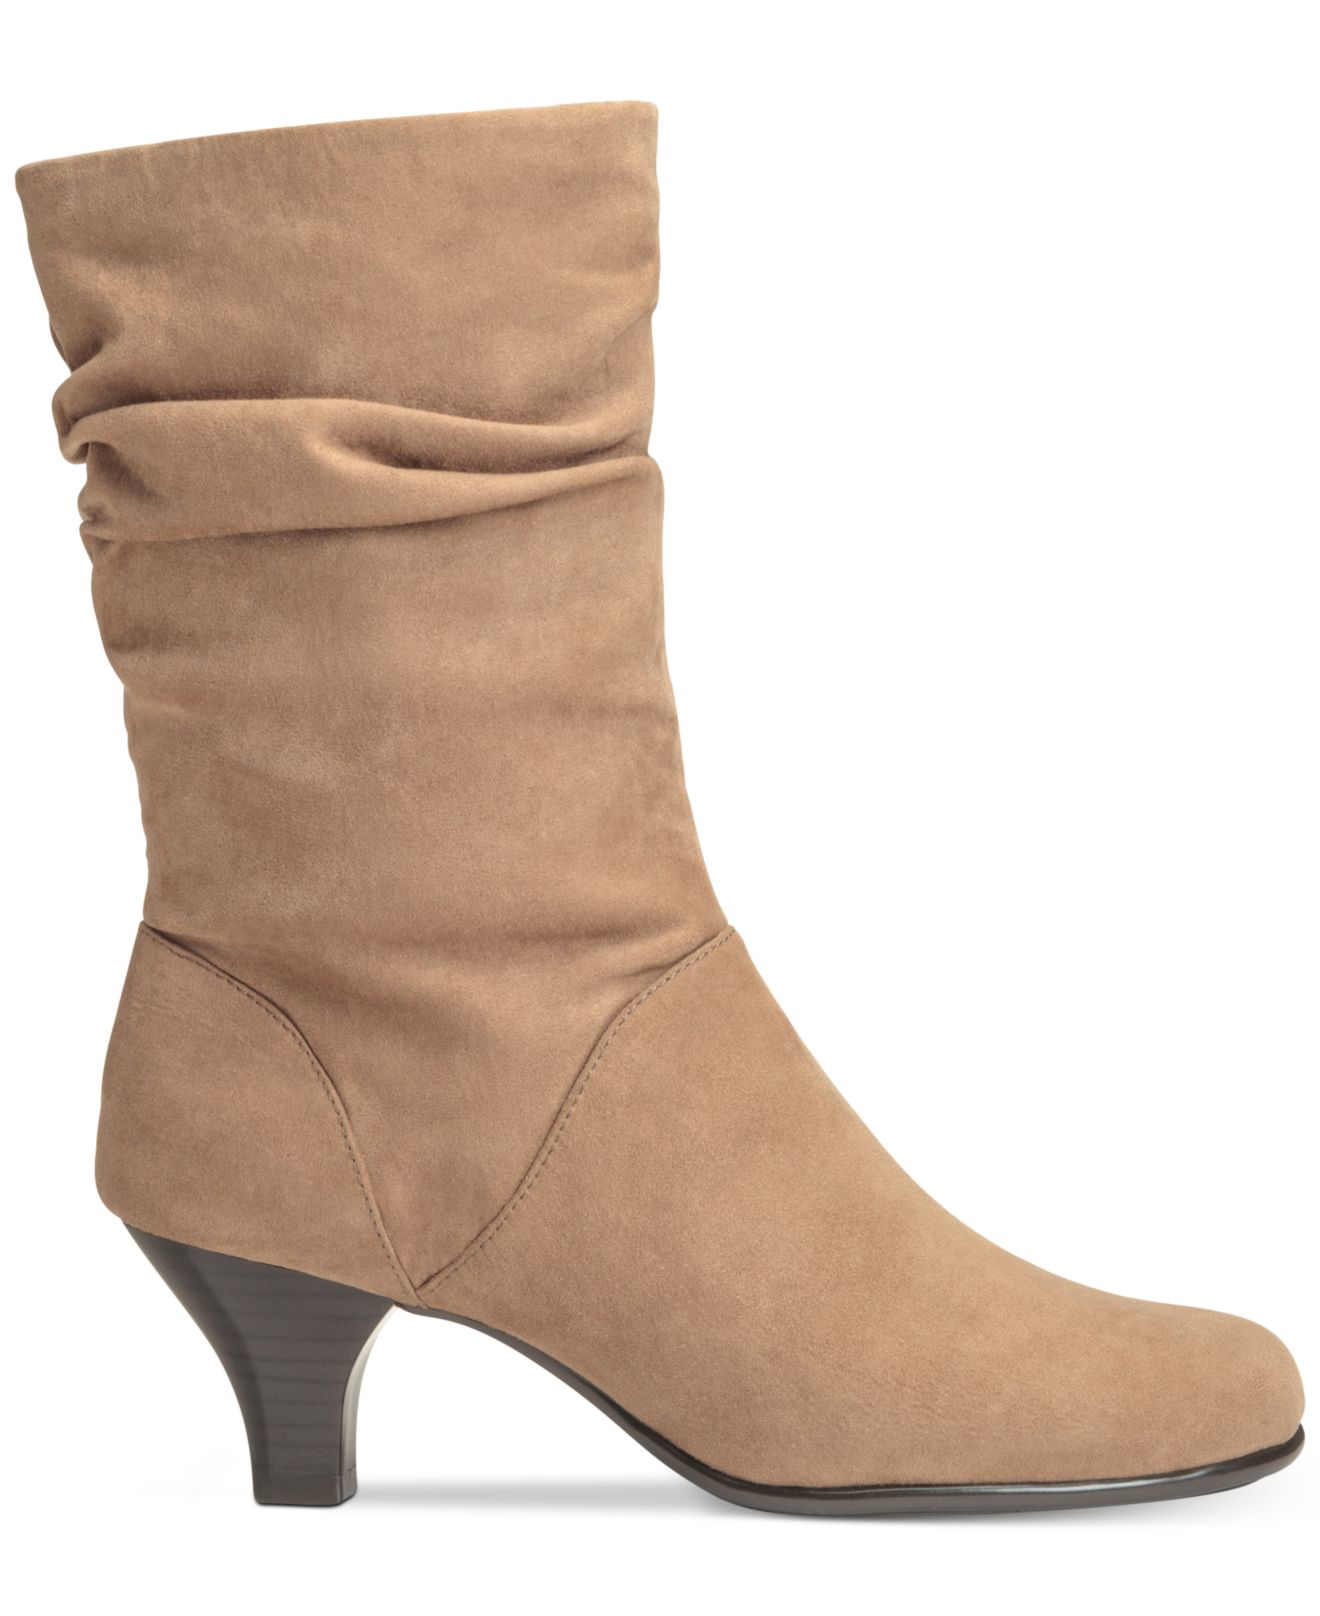 Aerosoles Suede Wise N Shine Slouch Boots in Brown - Lyst